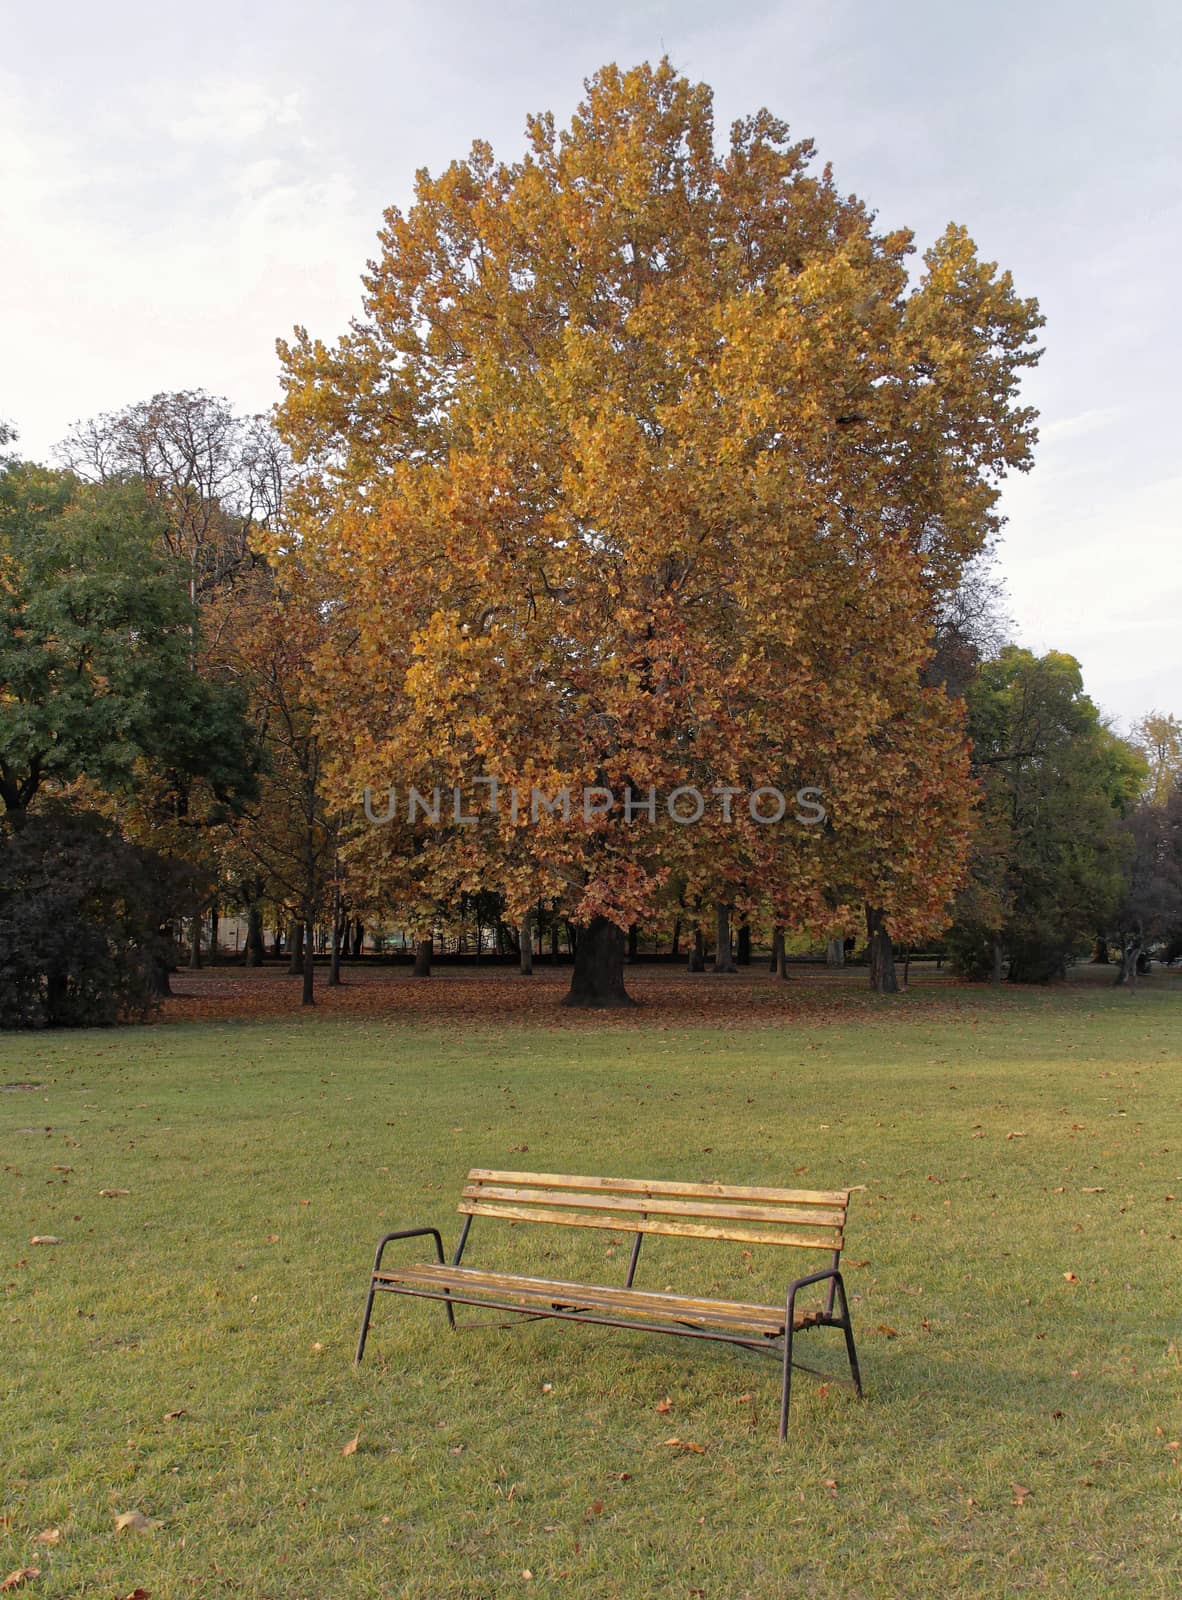 Autumn park benches and trees in the background.